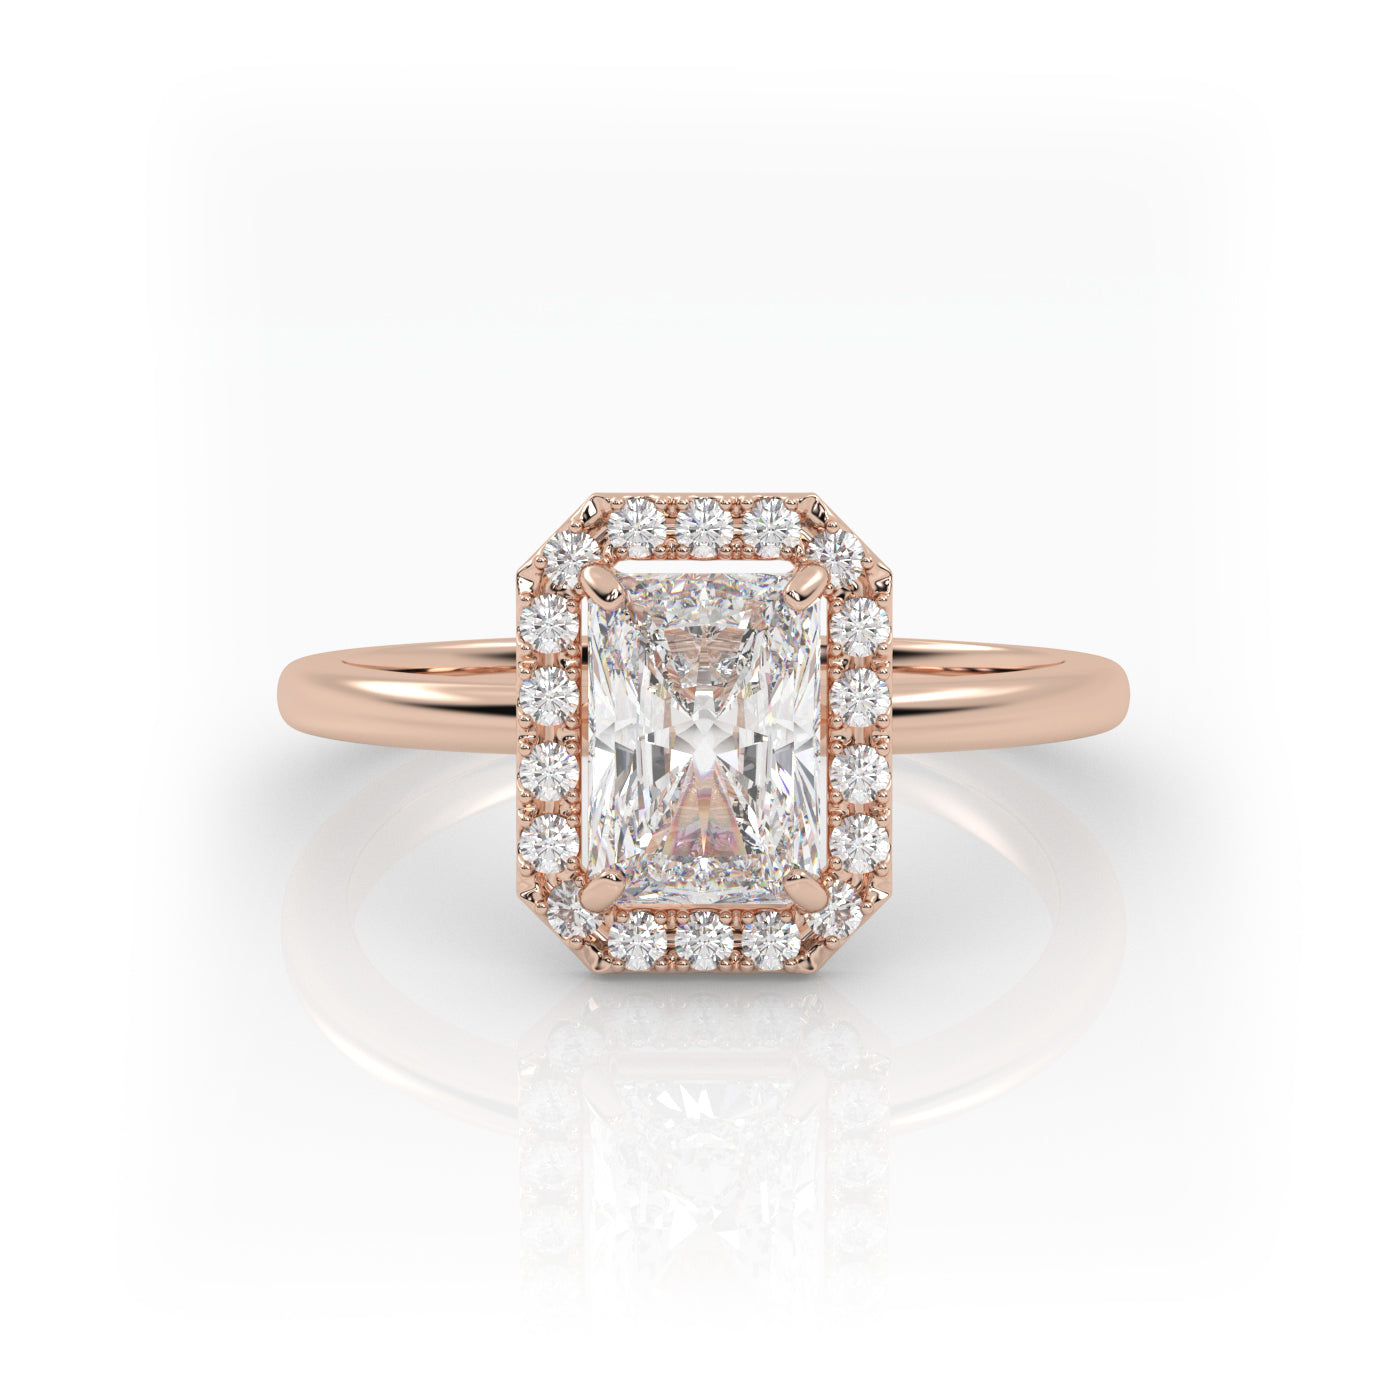 The Radiant Solitaire with Halo